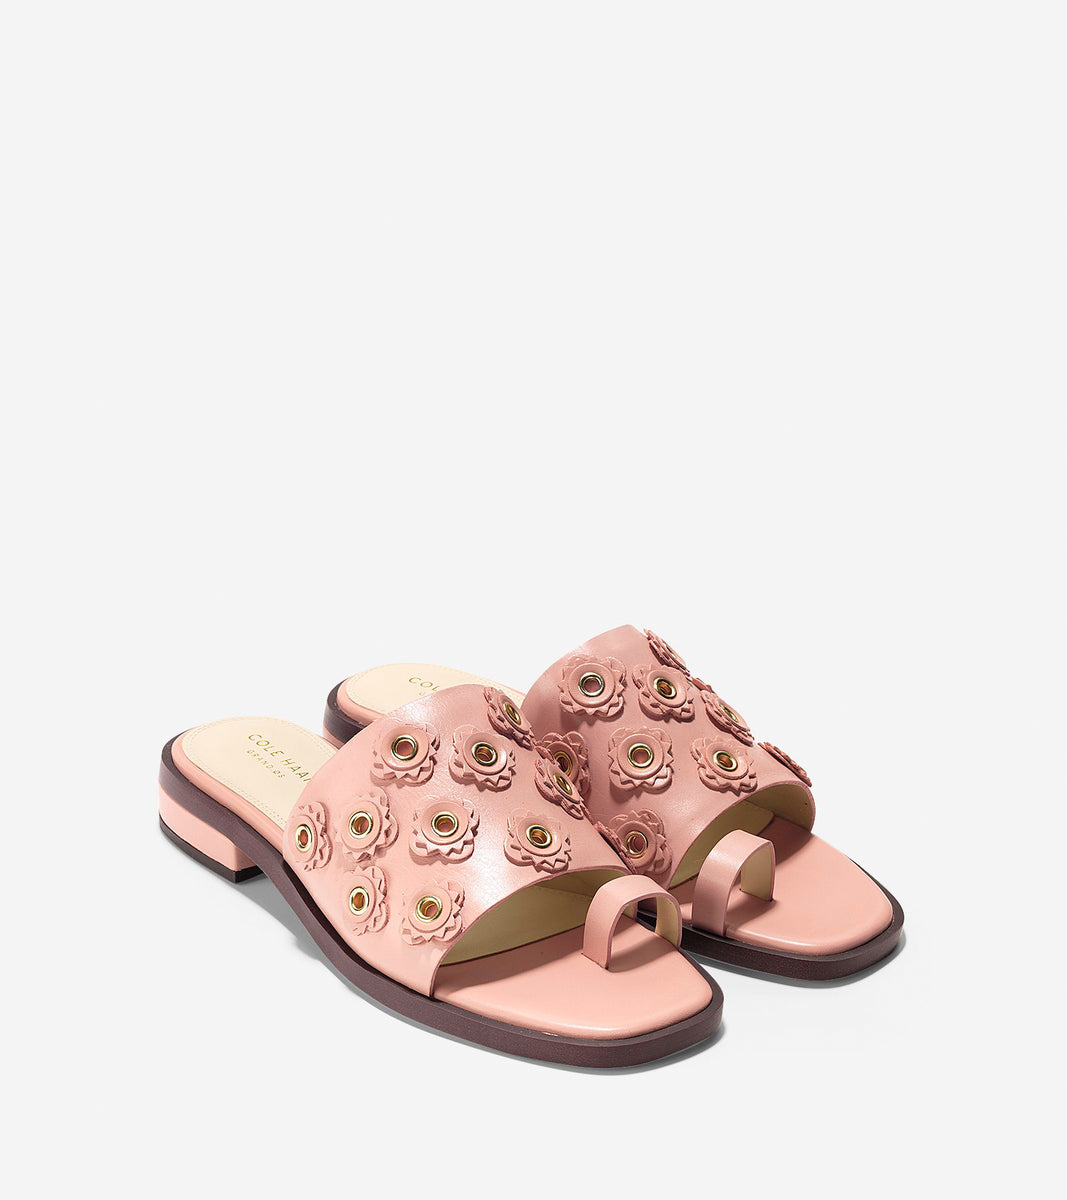 Carly Floral Sandal (35mm)